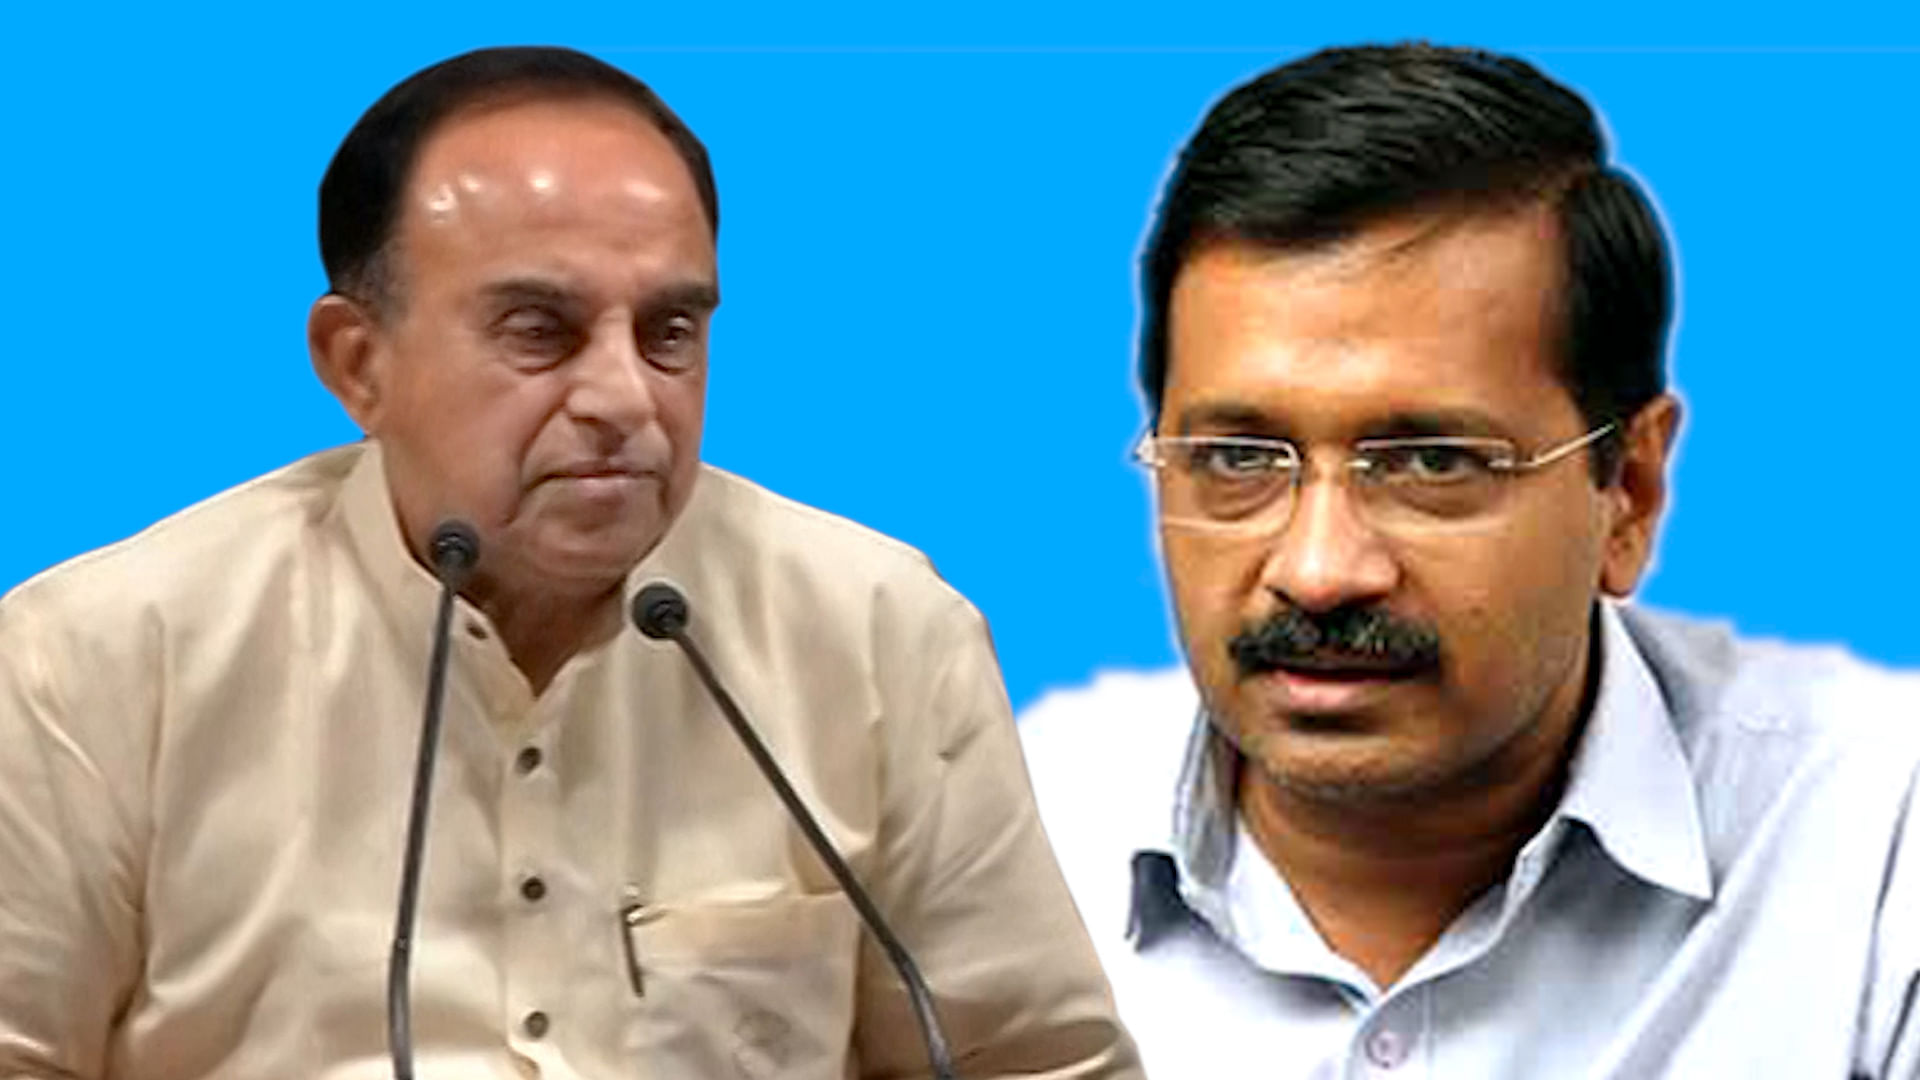 Speaking at a press conference in Thiruvananthapuram, Subramanian Swamy (left) on Saturday claimed that Arvind Kejriwal (right) didn’t get a rank in IIT entrance test. (Photo: altered by <b>The Quint</b>)